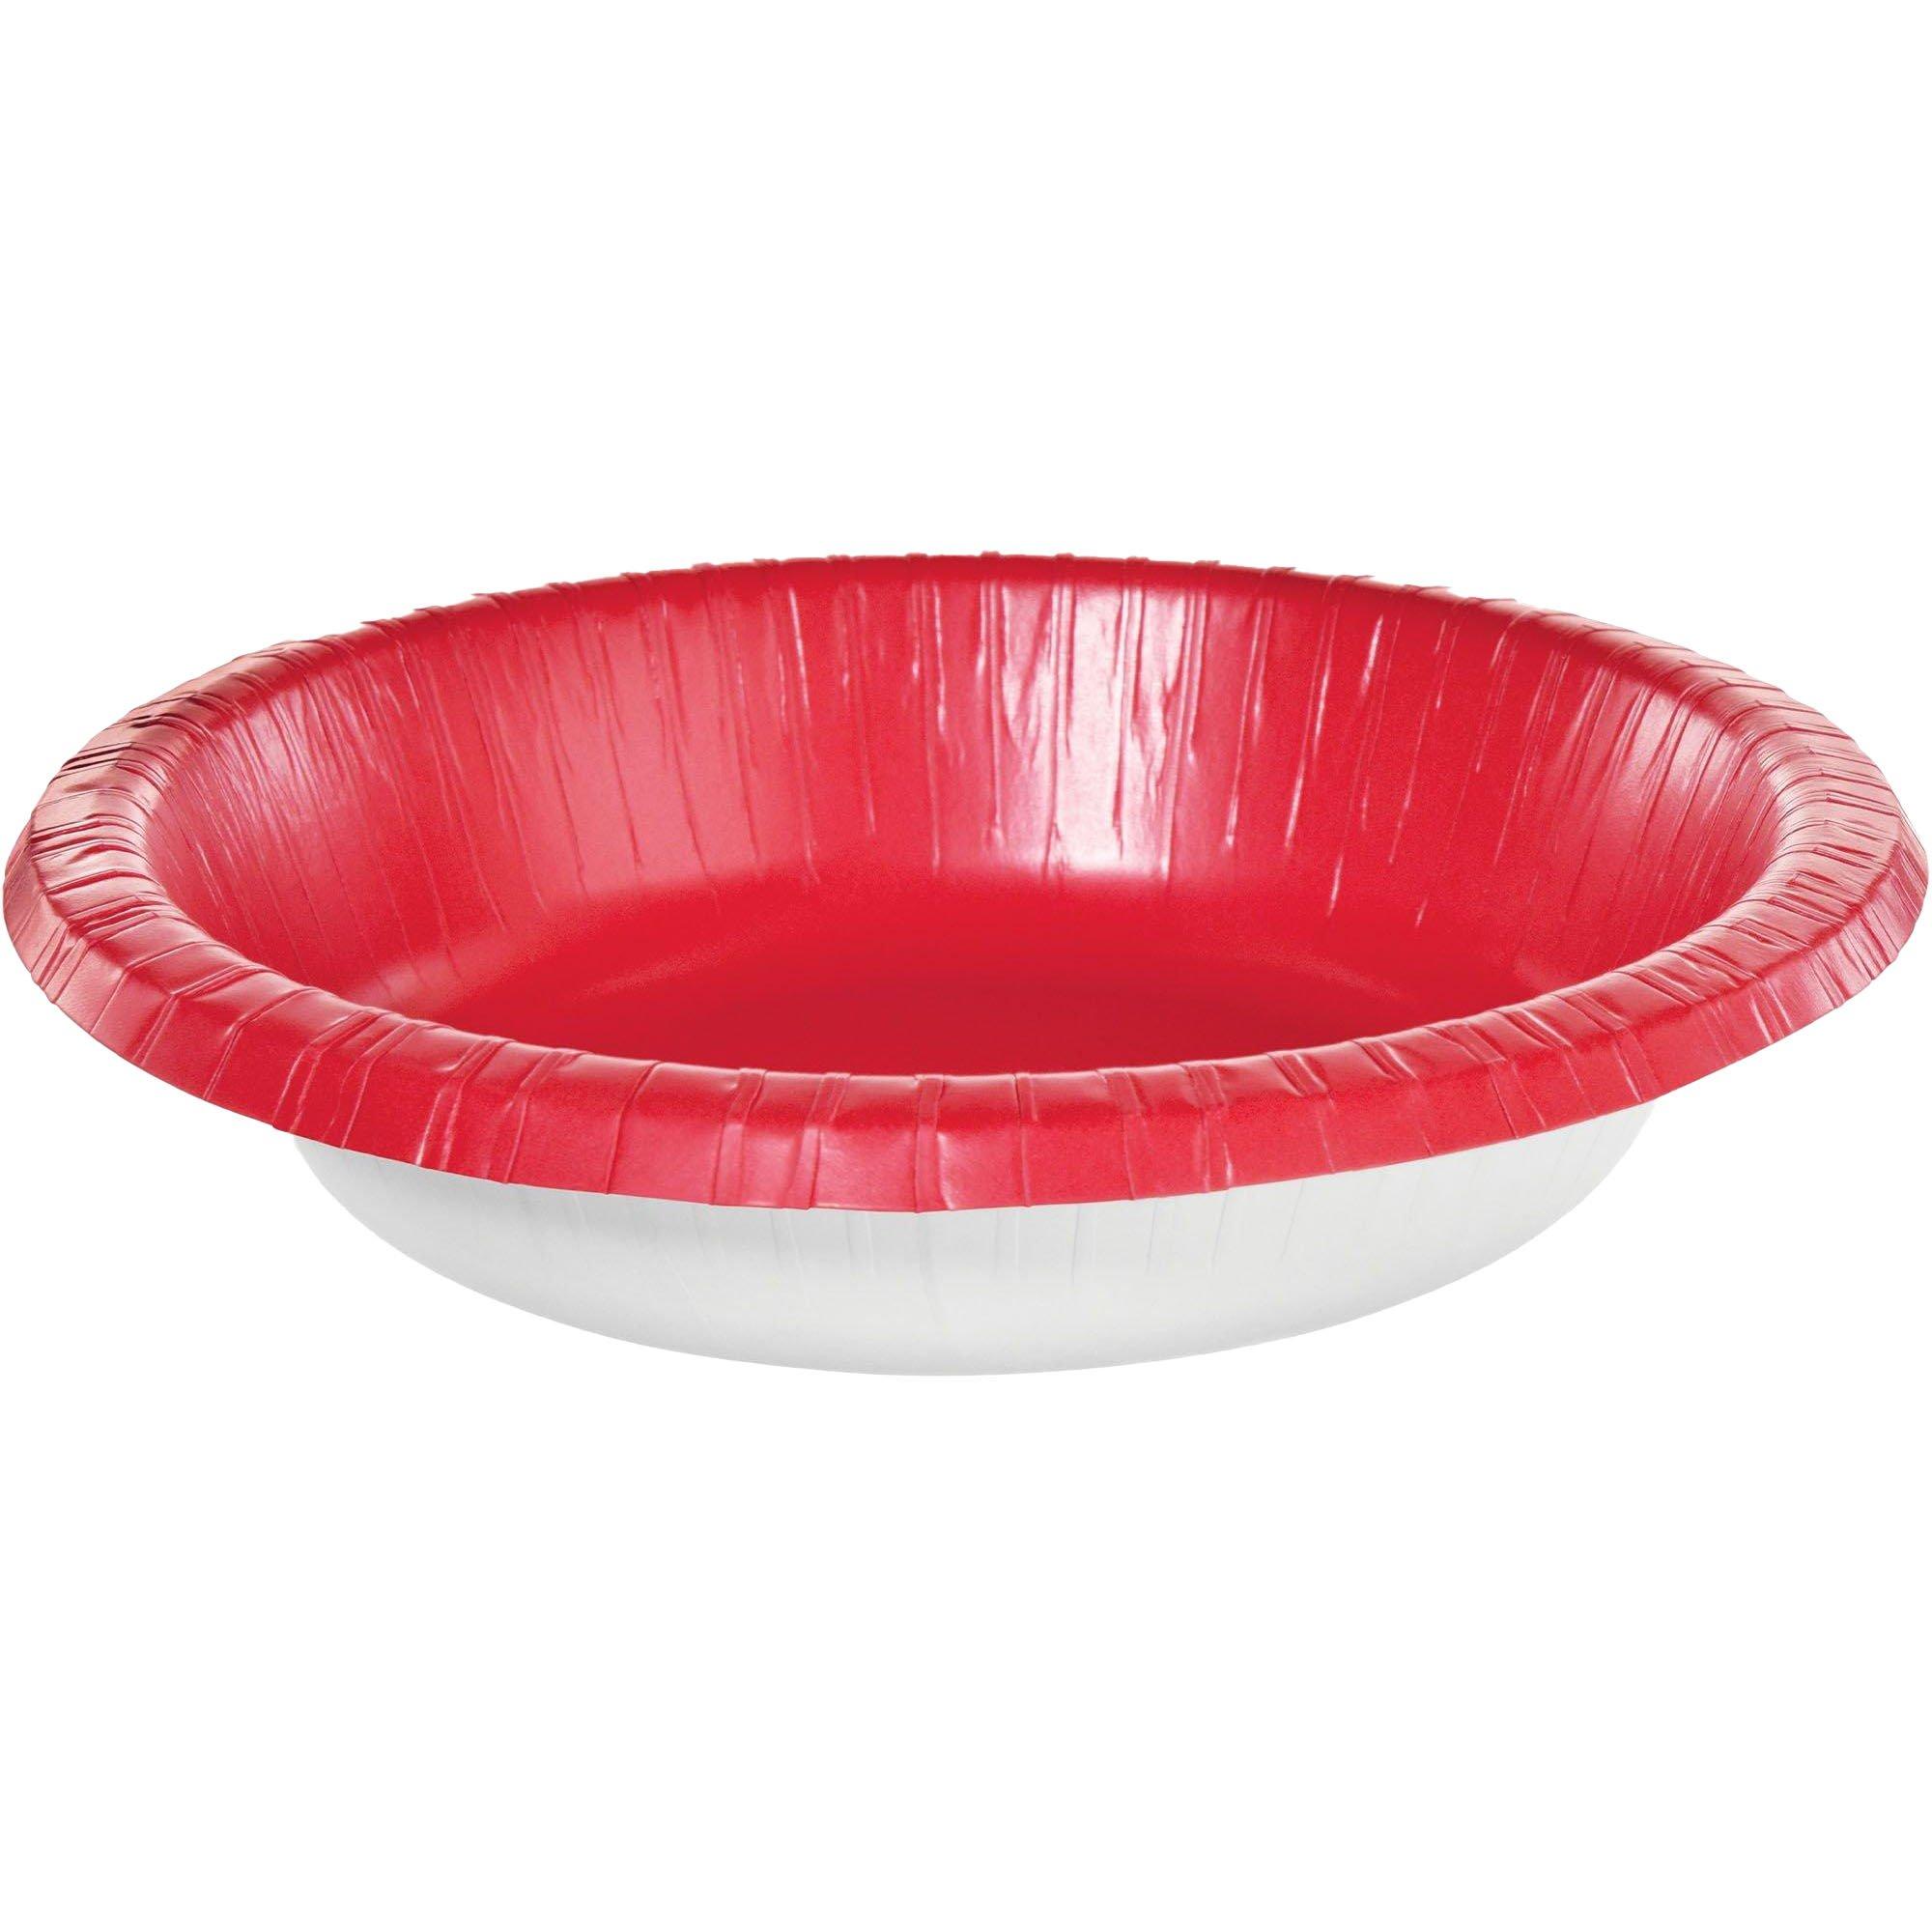 (120 Pack) EcoQuality 16 oz Round Cranberry Red Plastic Bowls Edge Collection - Disposable China Like Party Bowls, Heavy Duty Salad Bowls, Serving